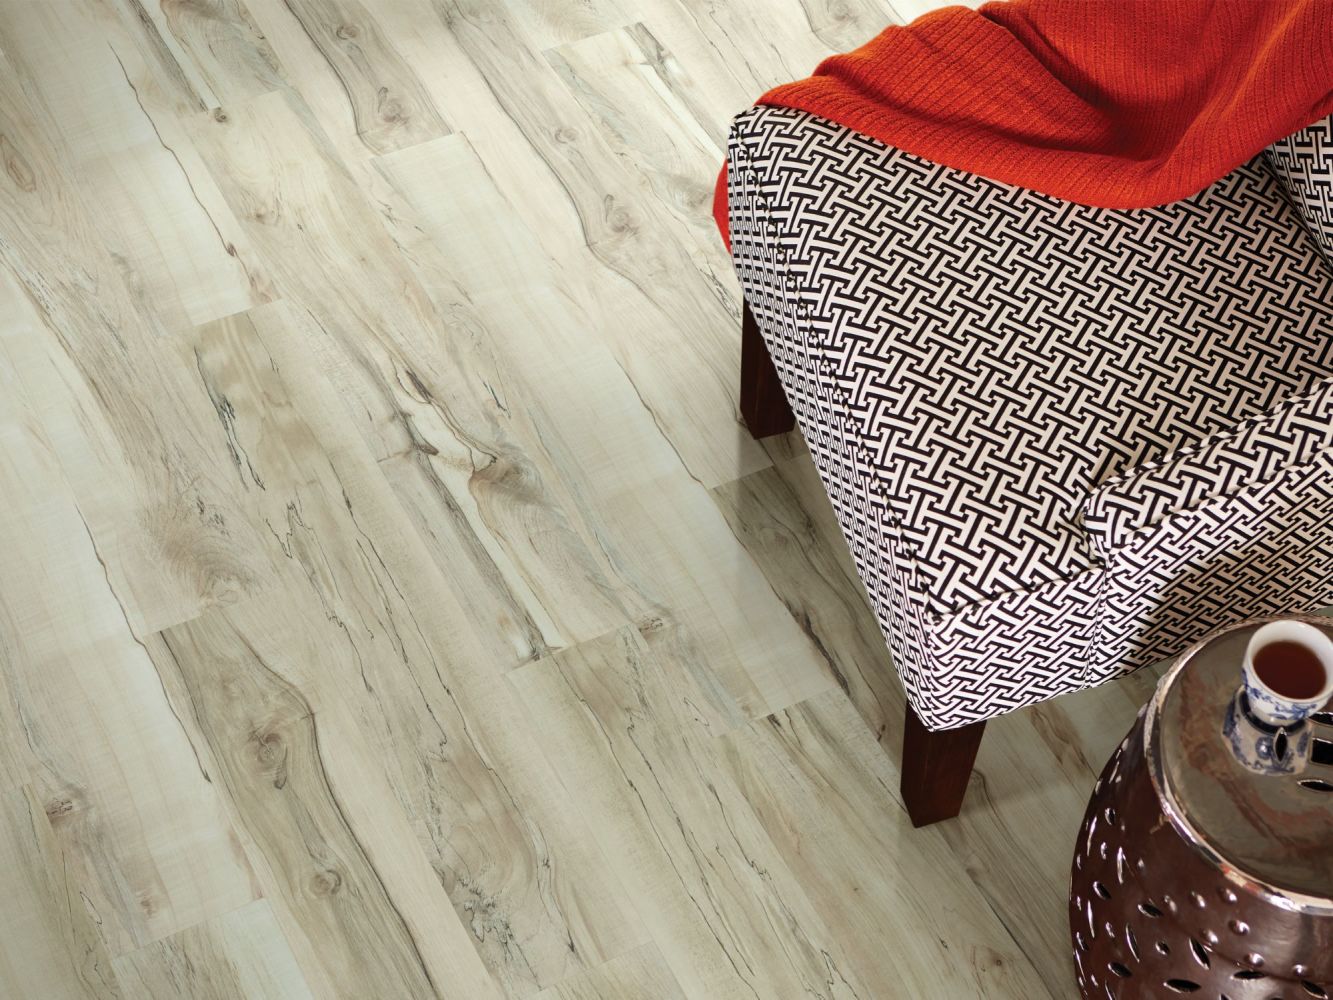 Shaw Floors Resilient Property Solutions Brio Plus 20 Mil Mineral Maple 00297_VE429